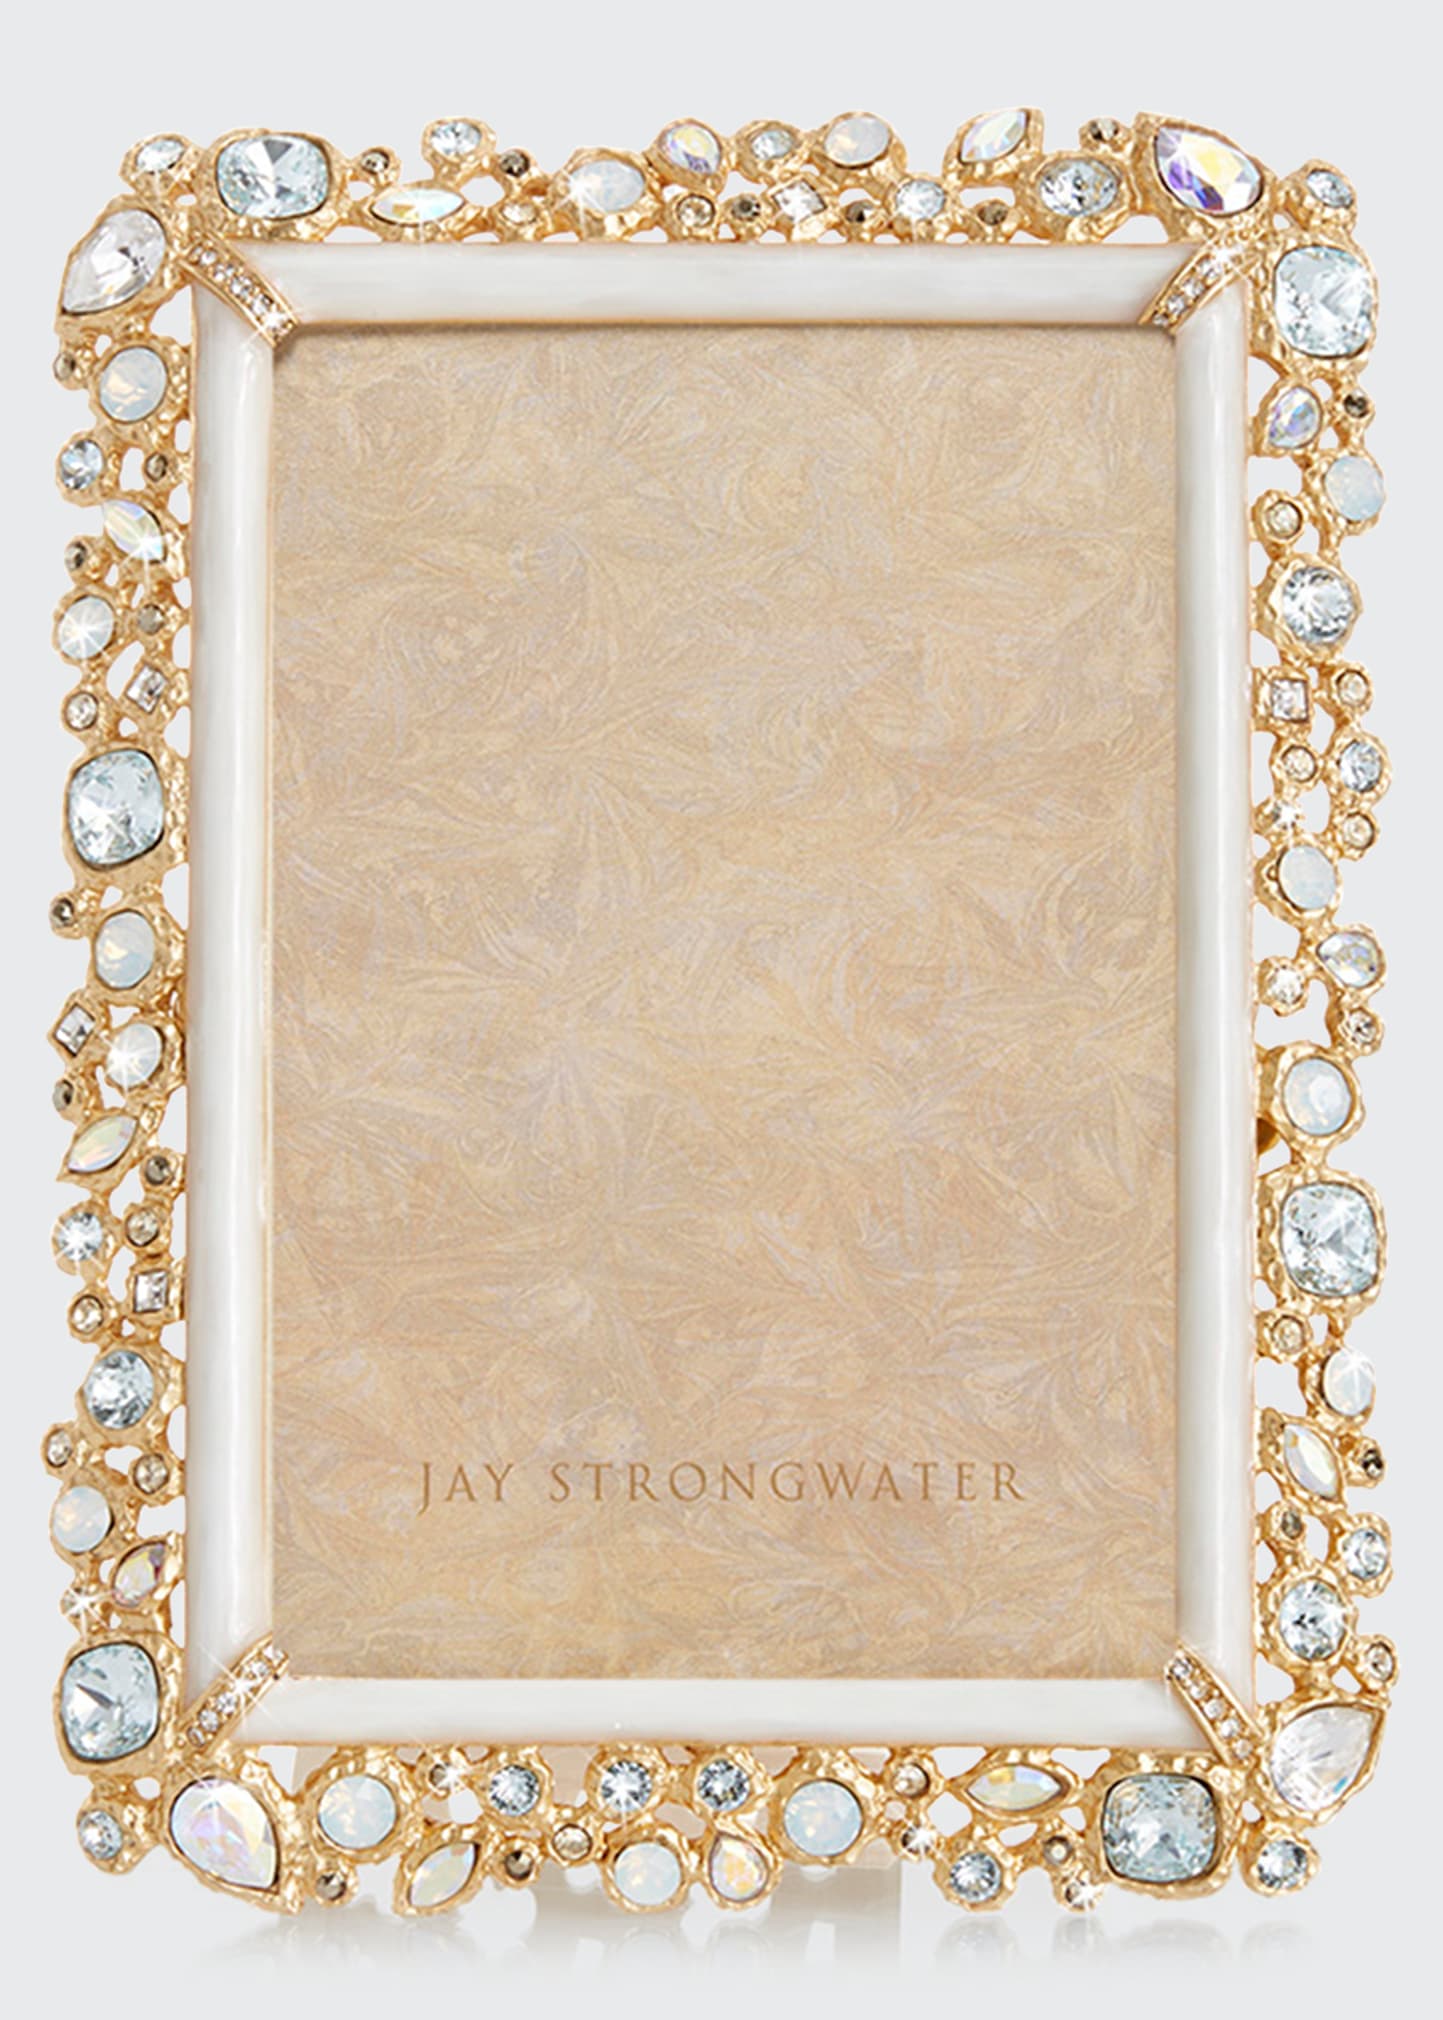 JAY STRONGWATER BEJEWELED FRAME, 4" X 6"